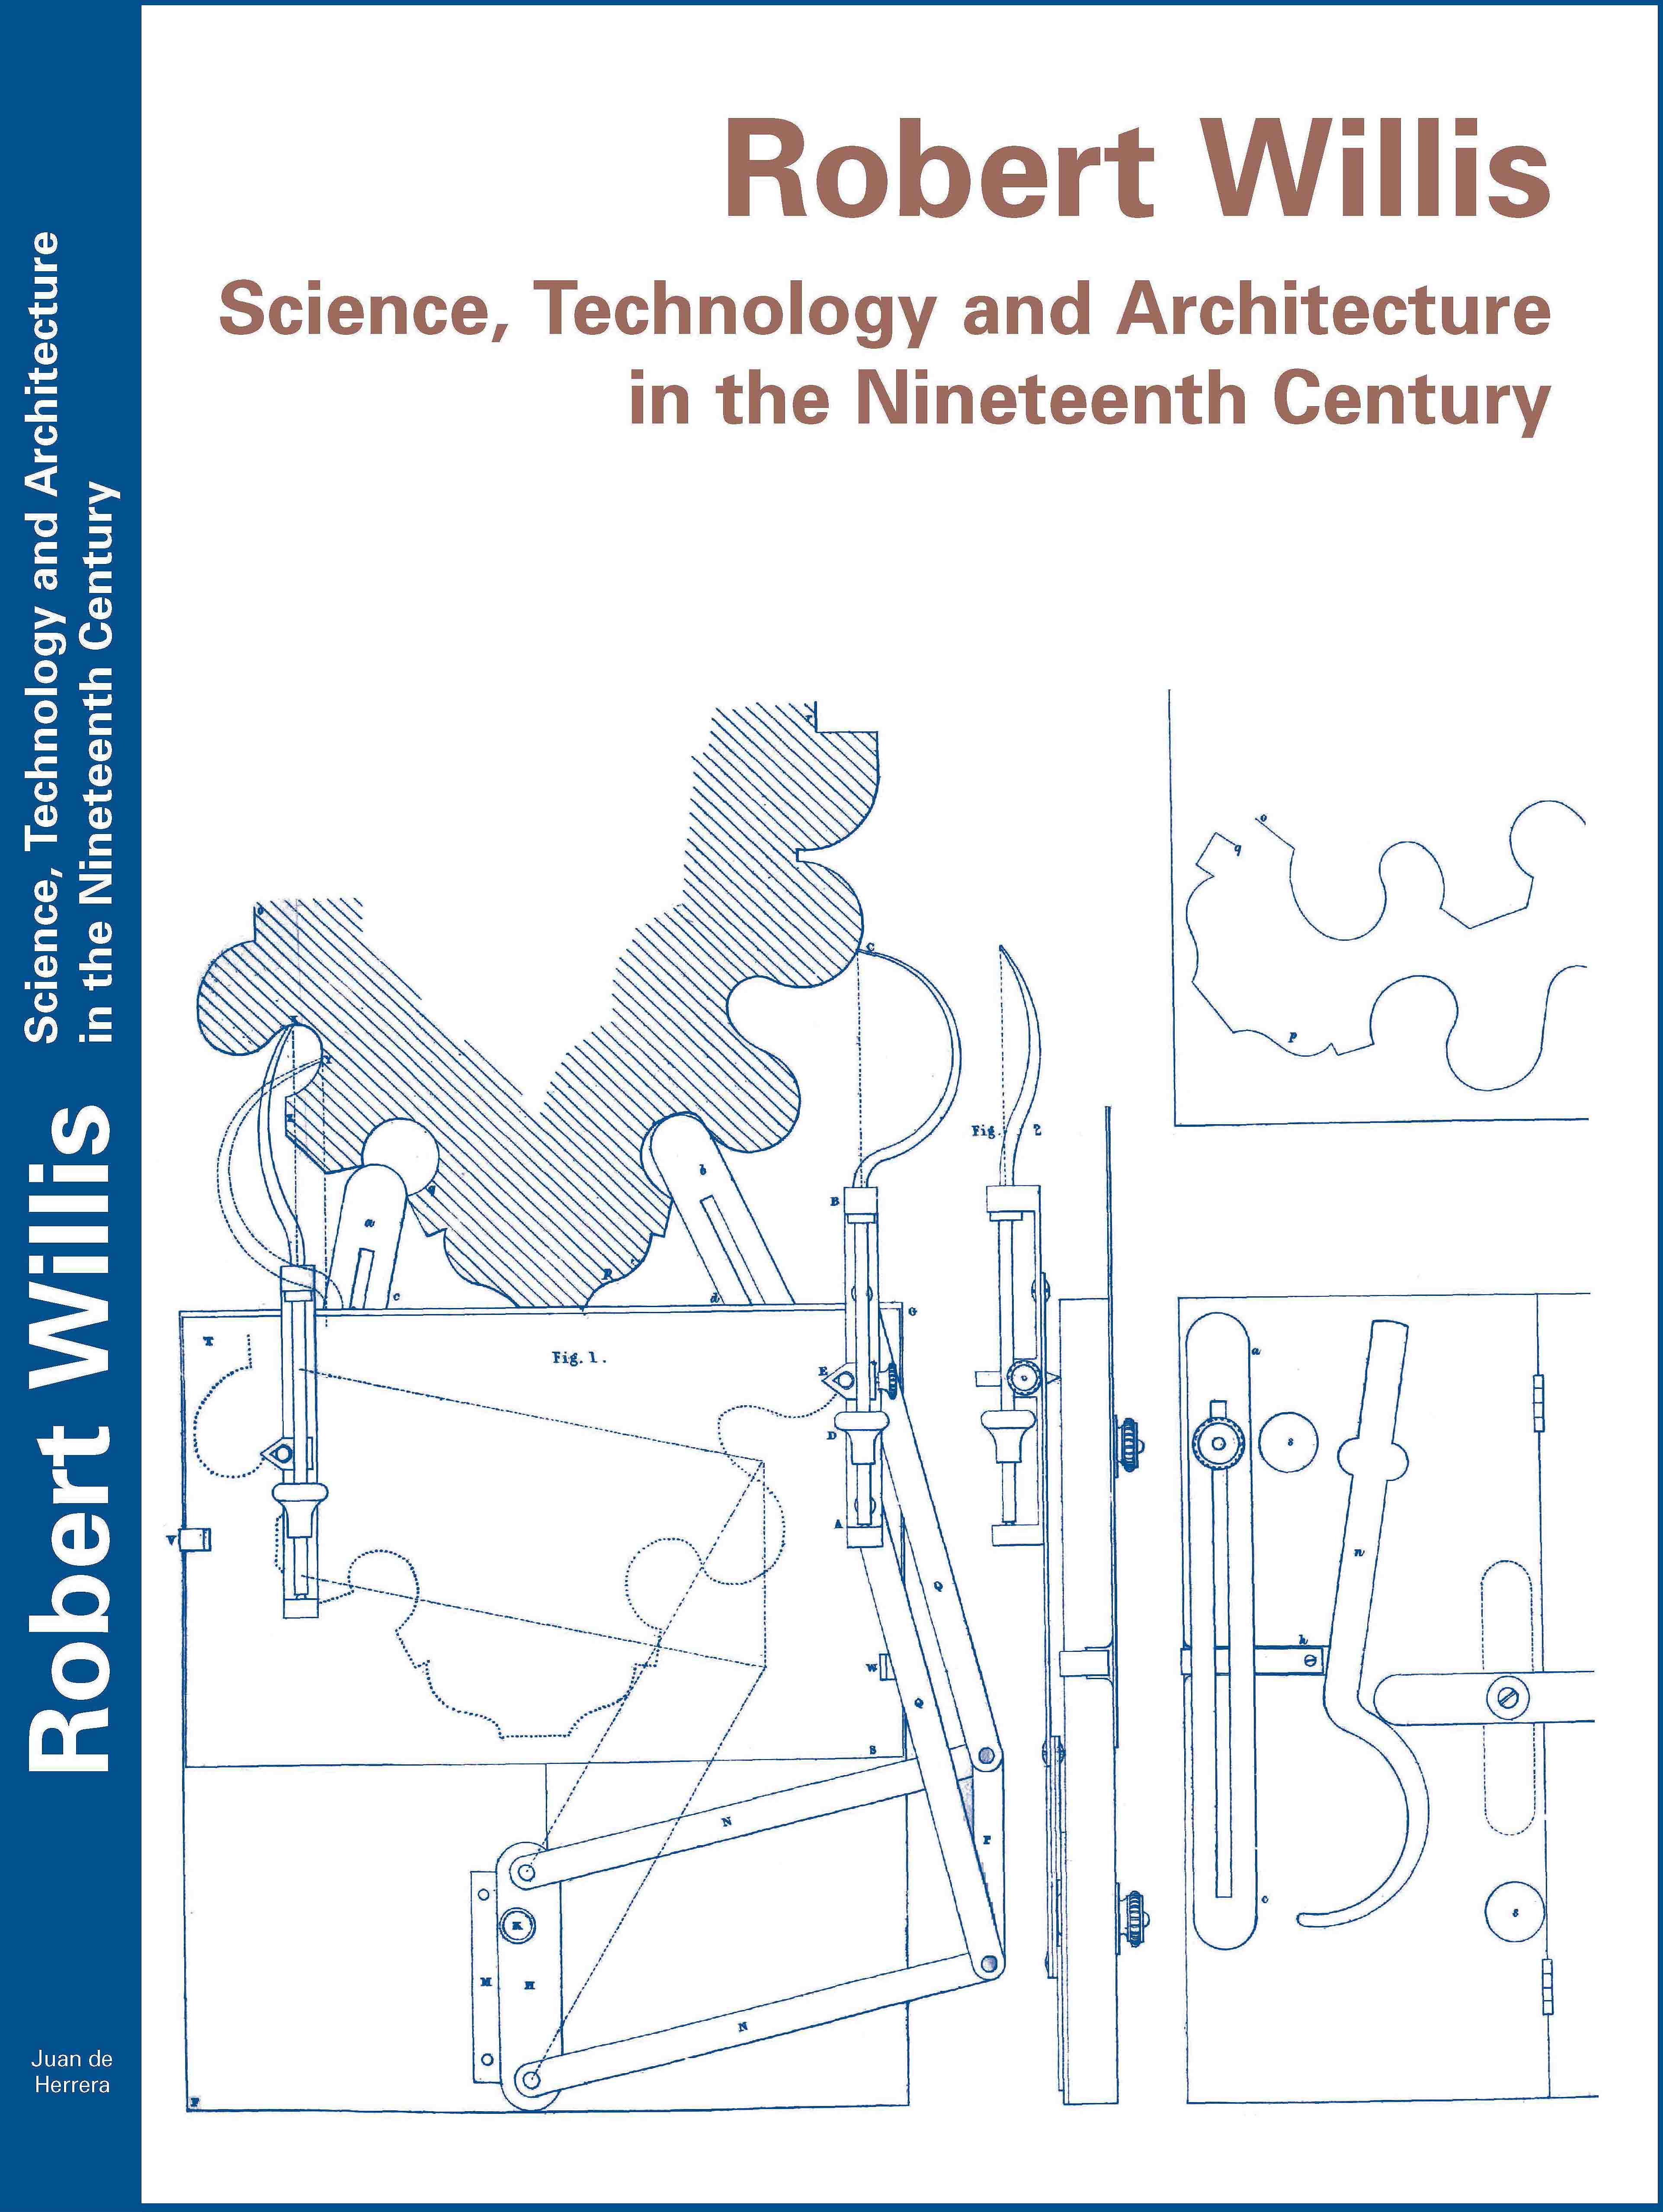 New book: Robert Willis, Science, Technology and Architecture in the Nineteenth Century